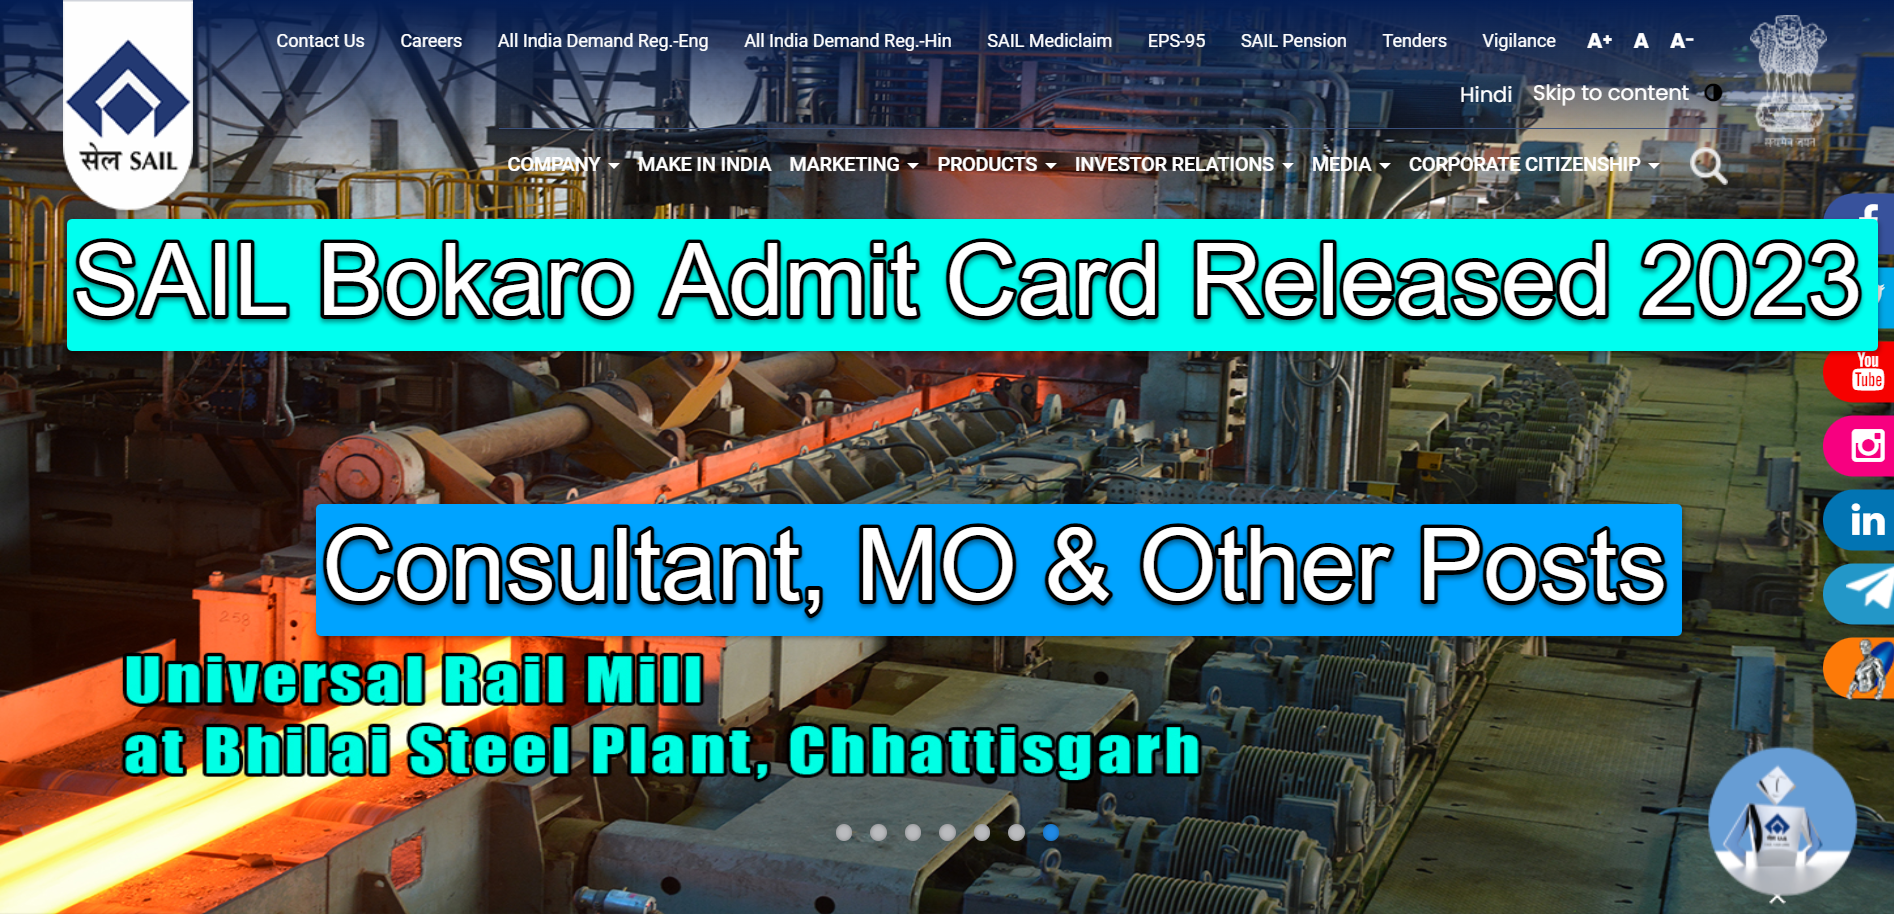 SAIL Bokaro Admit Card Released 2023 : Consultant, MO & Other Posts